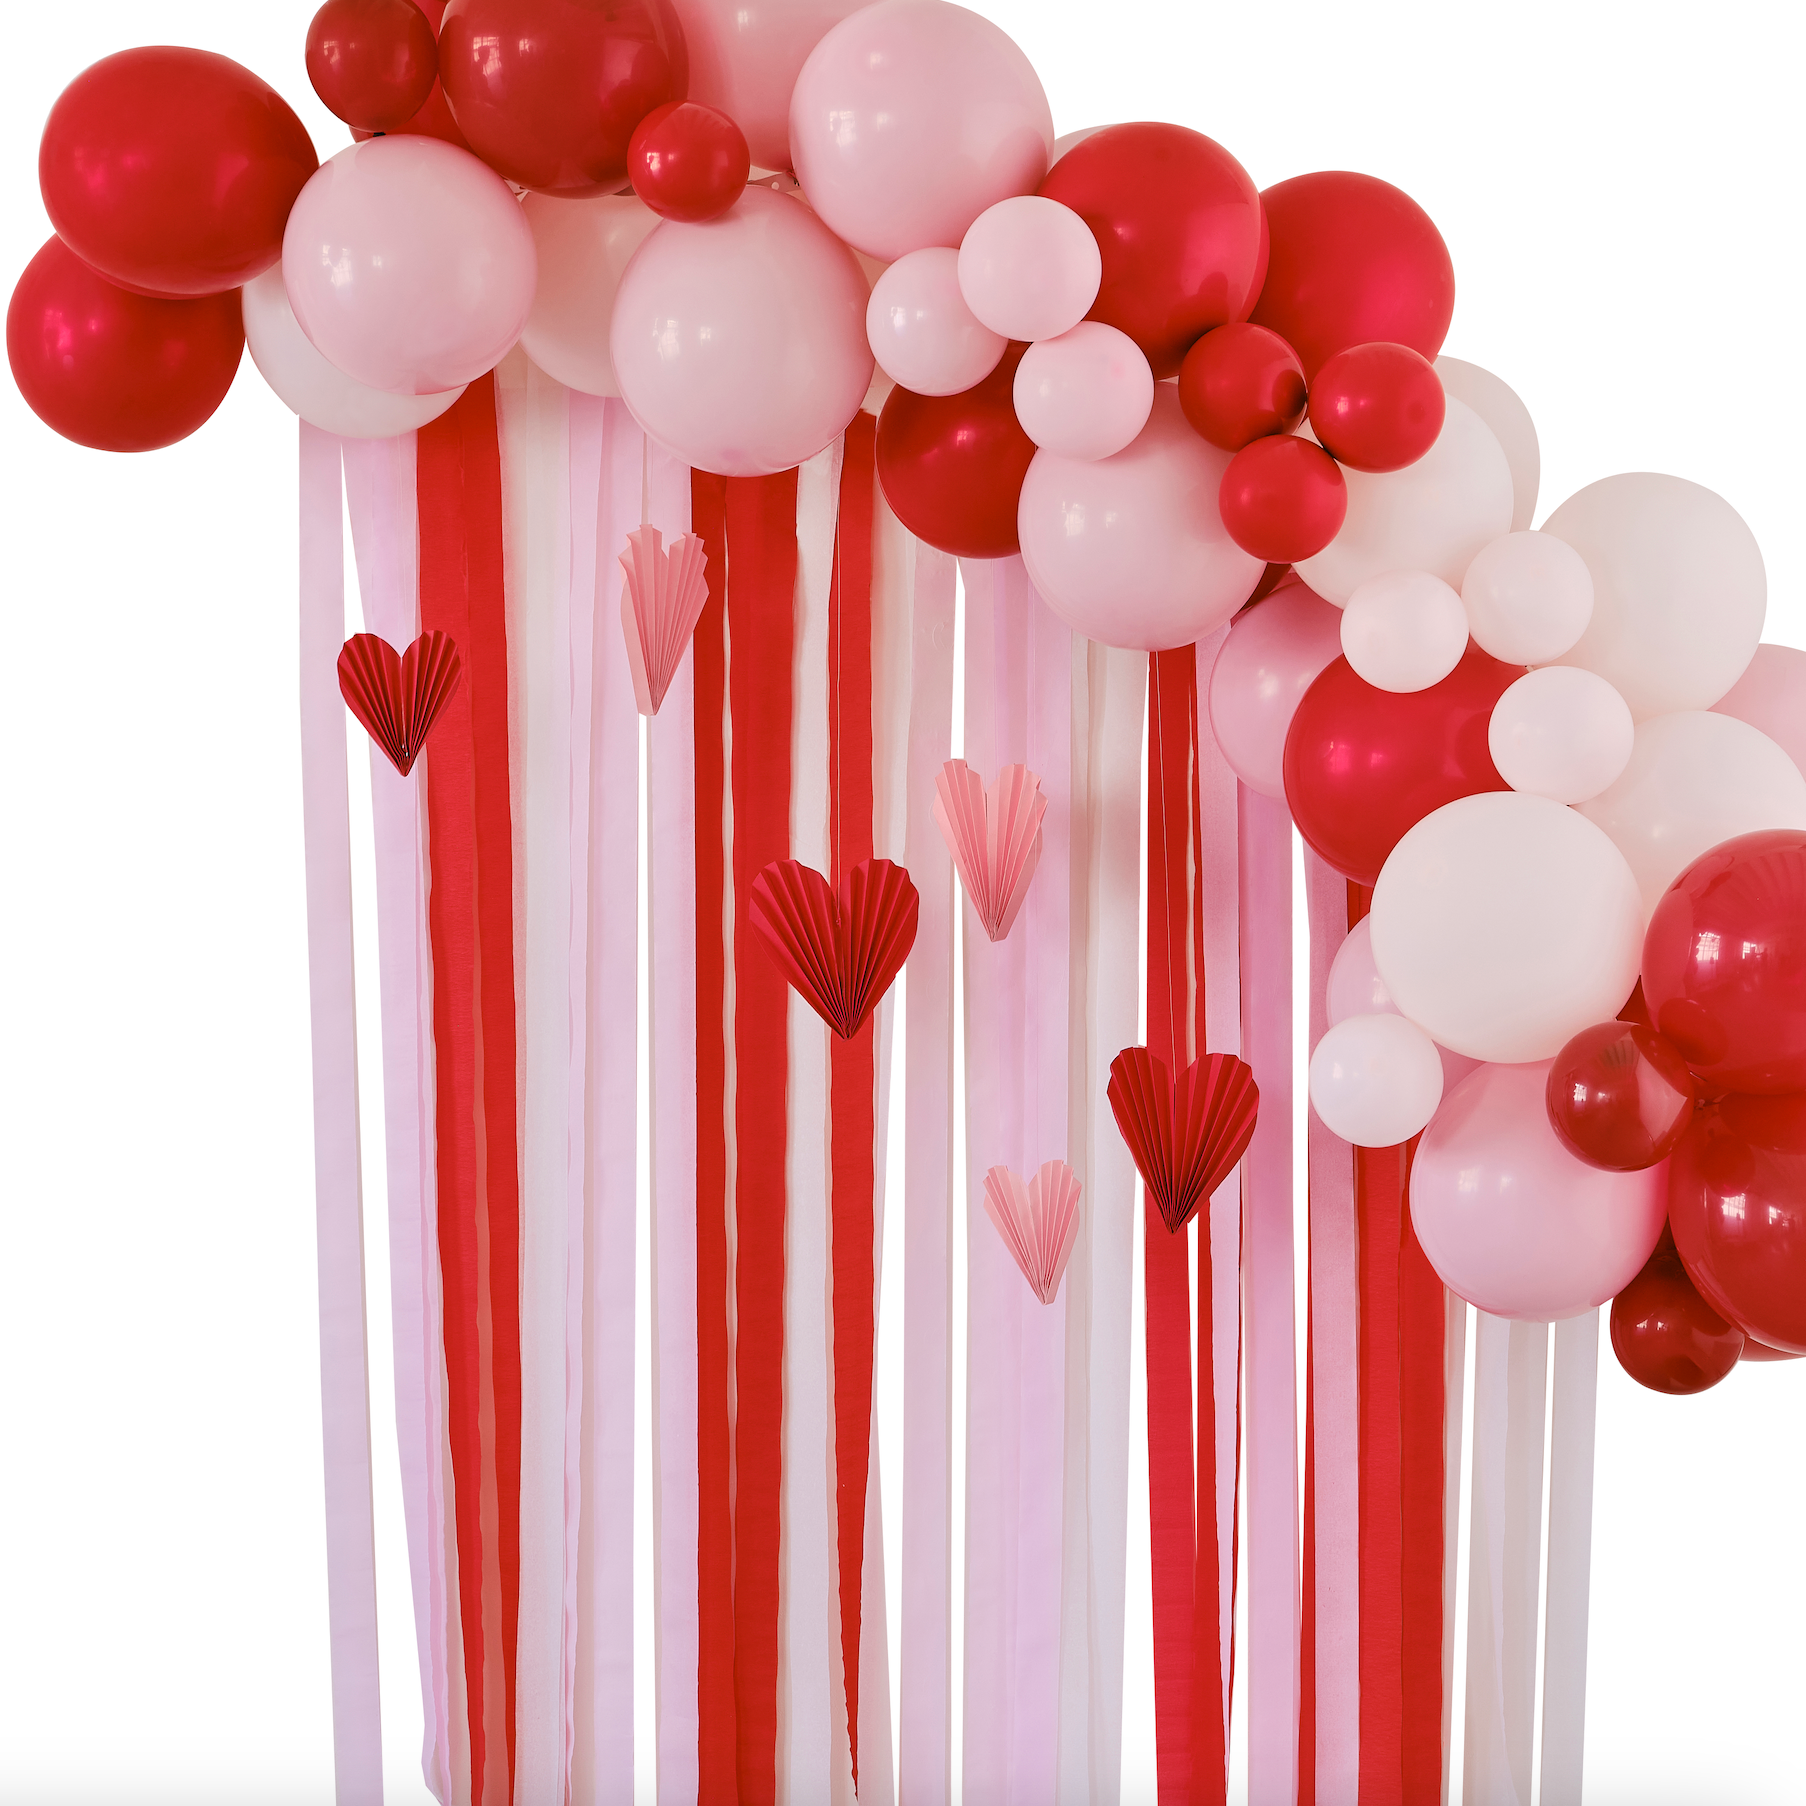 Red & Pink Balloon Arch Party Backdrop with Streamers and Heart Decorations